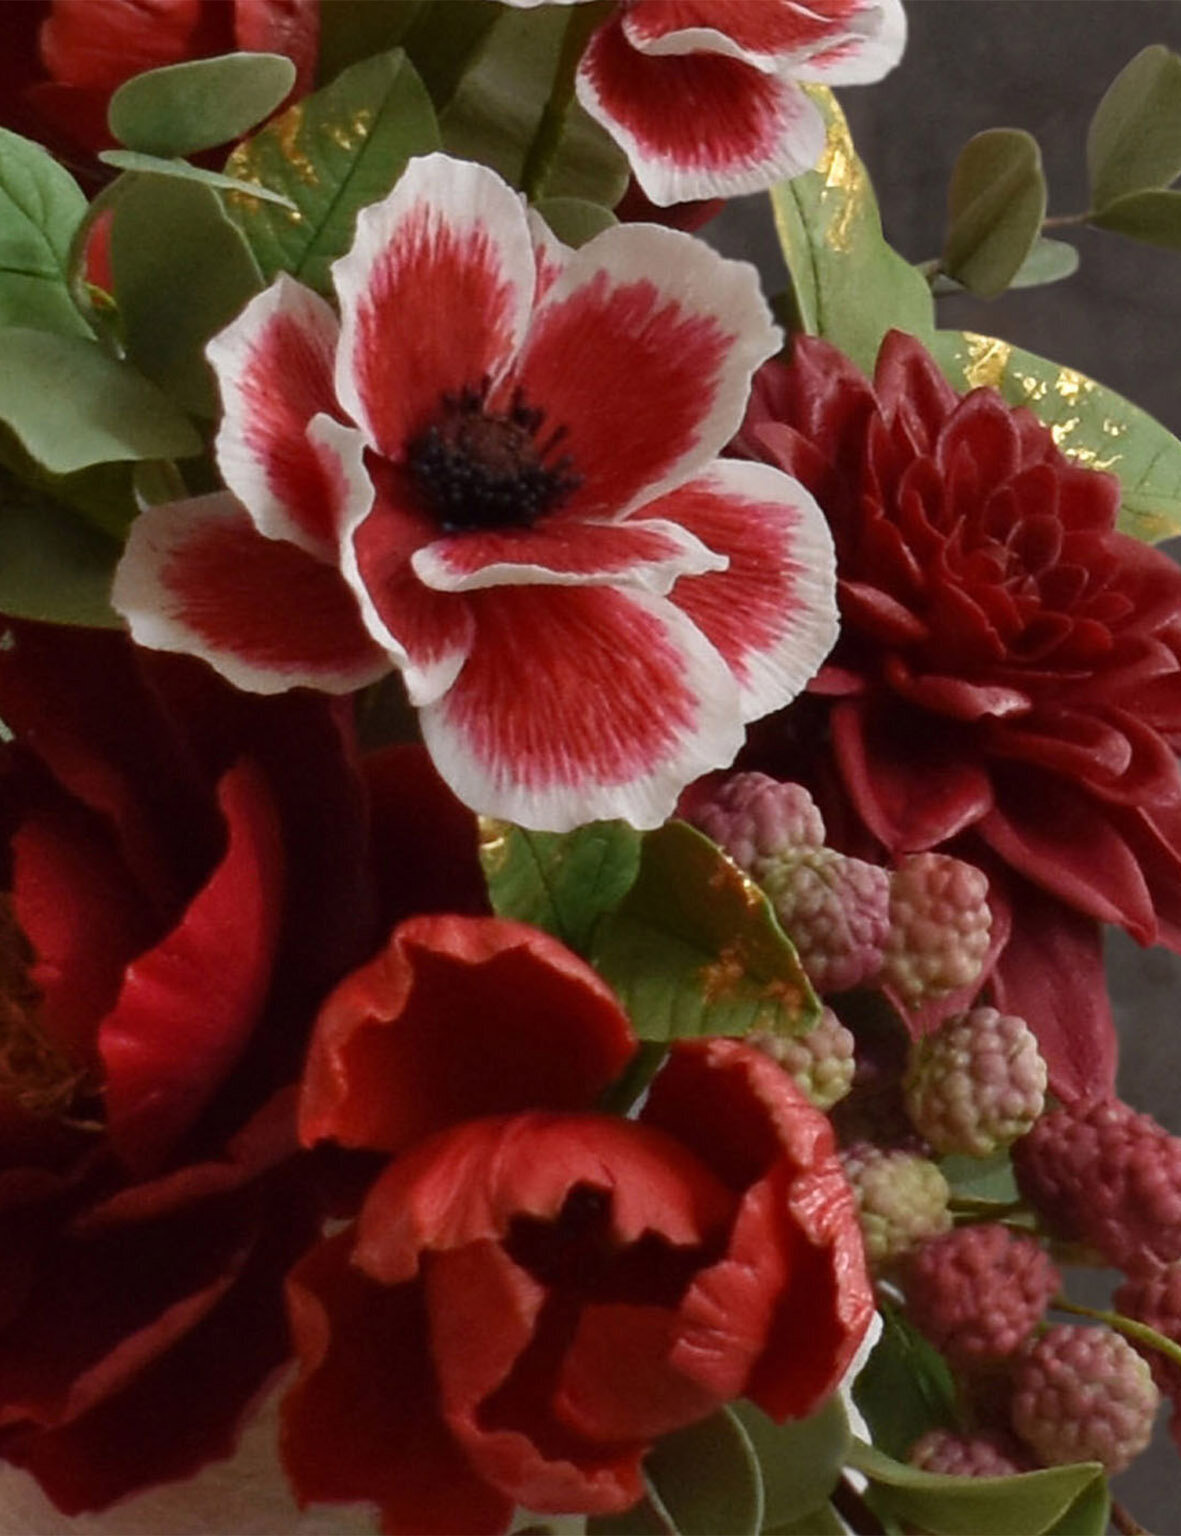 Rich red sugar flowers including a dahlia, poppies and parrot tulips